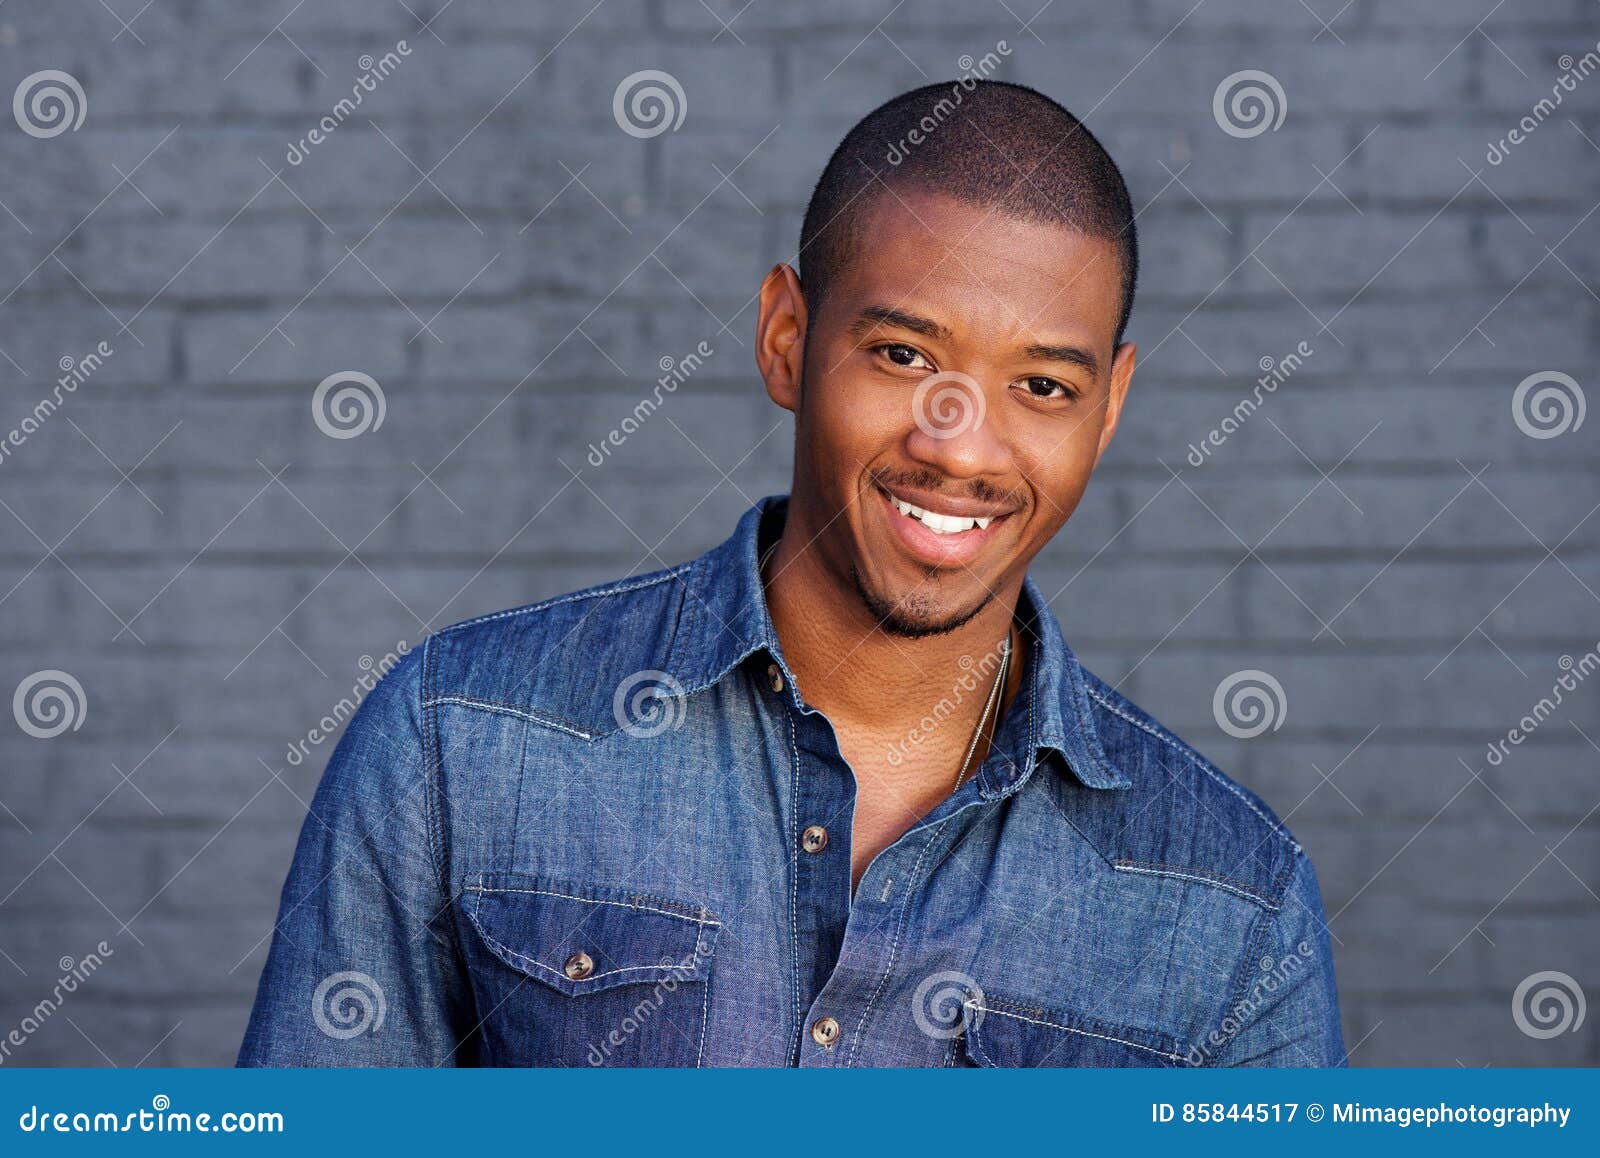 cool black guy smiling with blue shirt